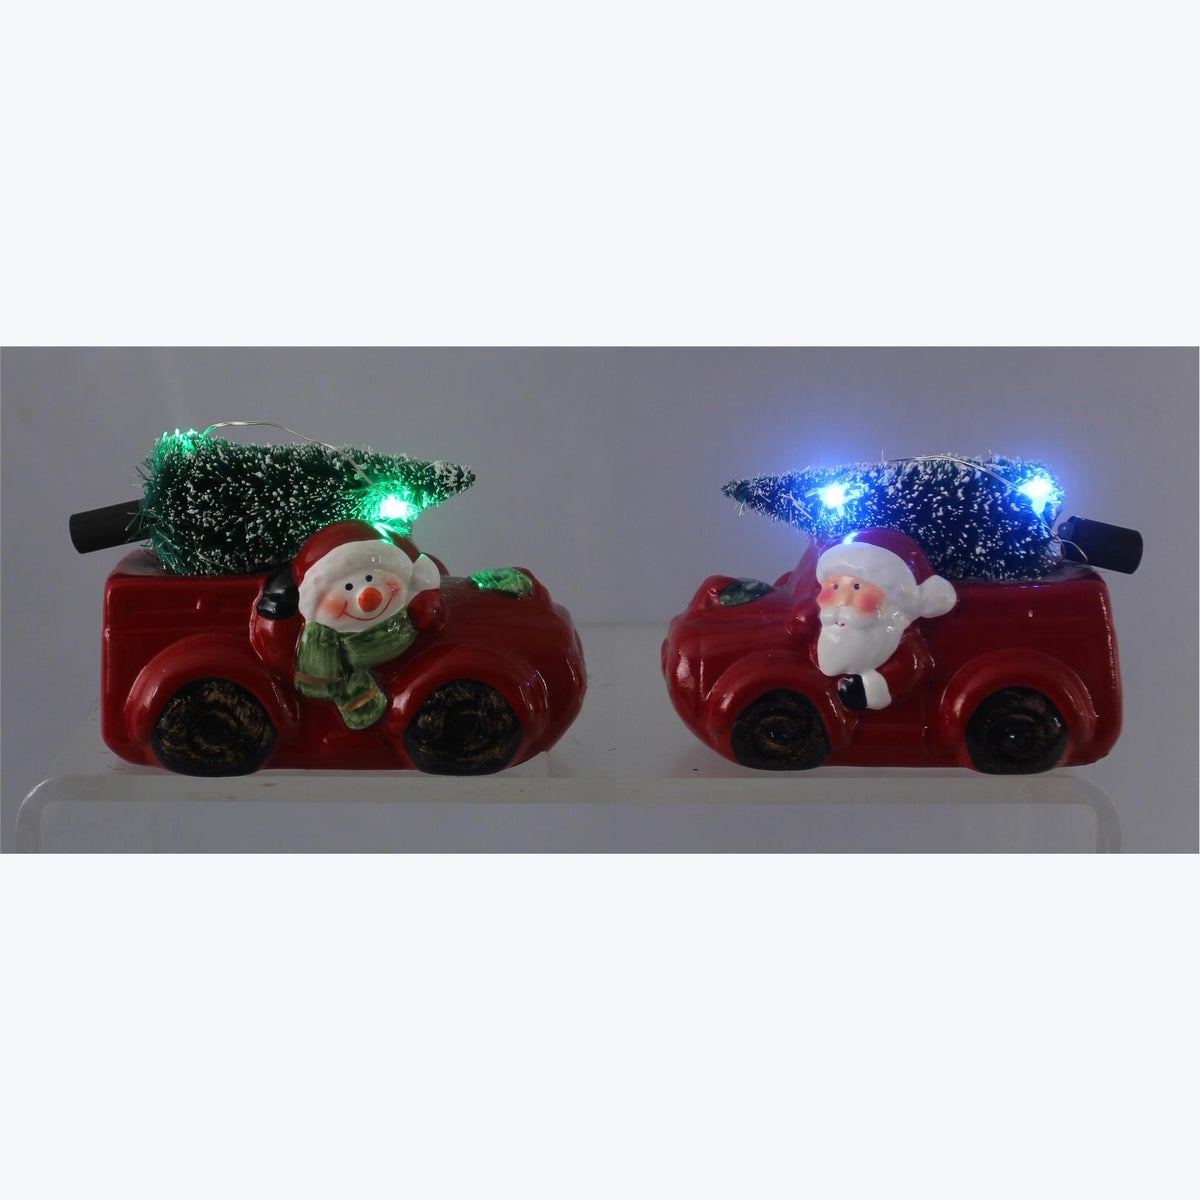 Ceramic Santa and Snowman Truck with LED Christmas Tree, 2 Ast